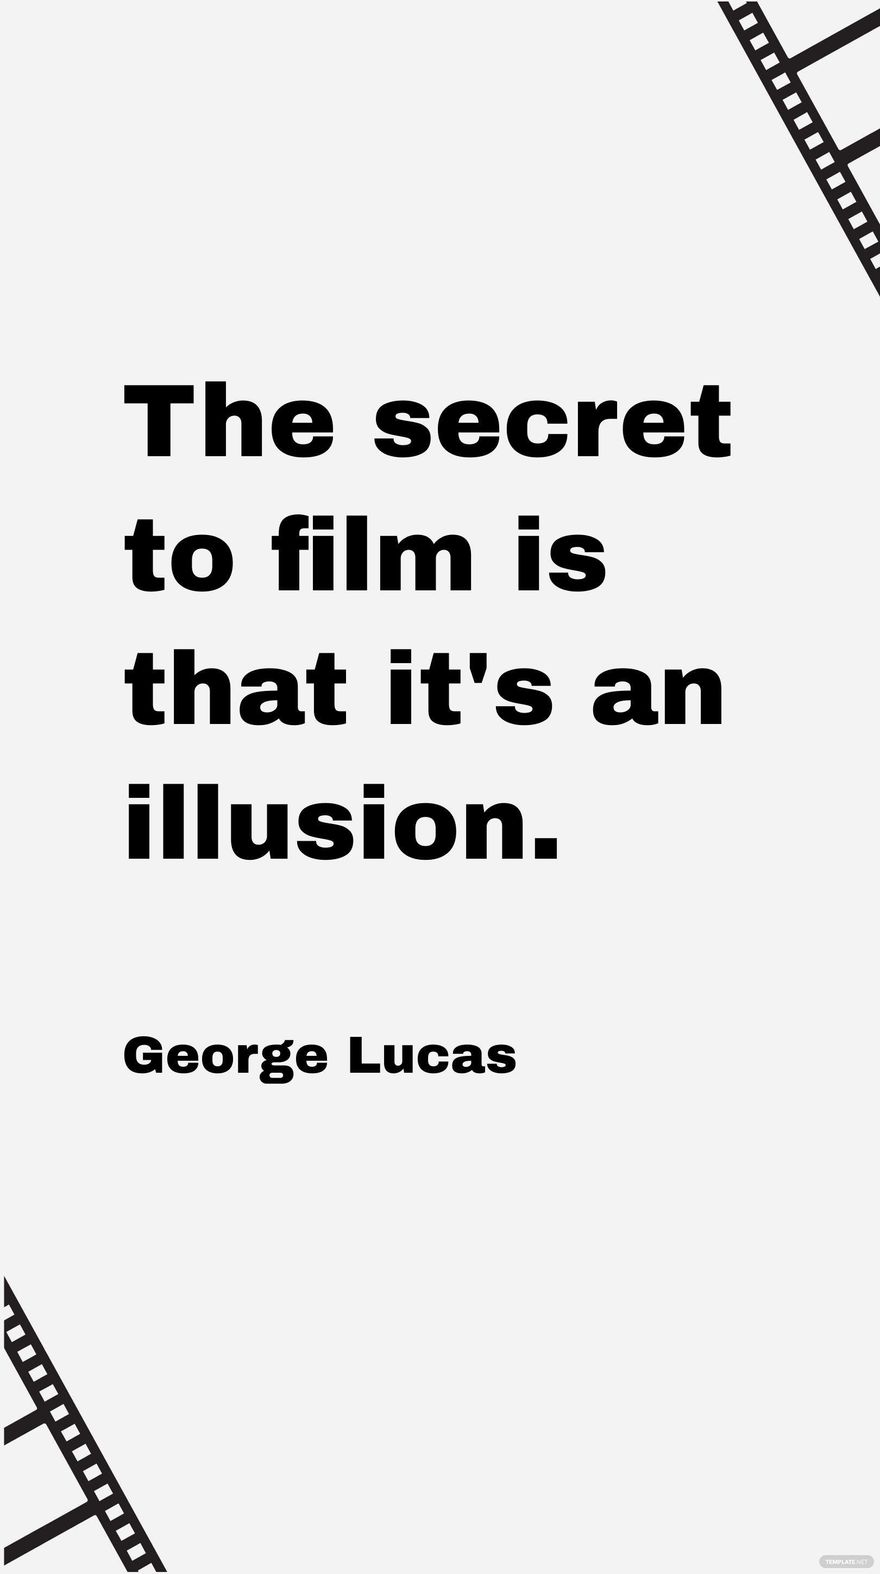 Free George Lucas - The secret to film is that it's an illusion. in JPG